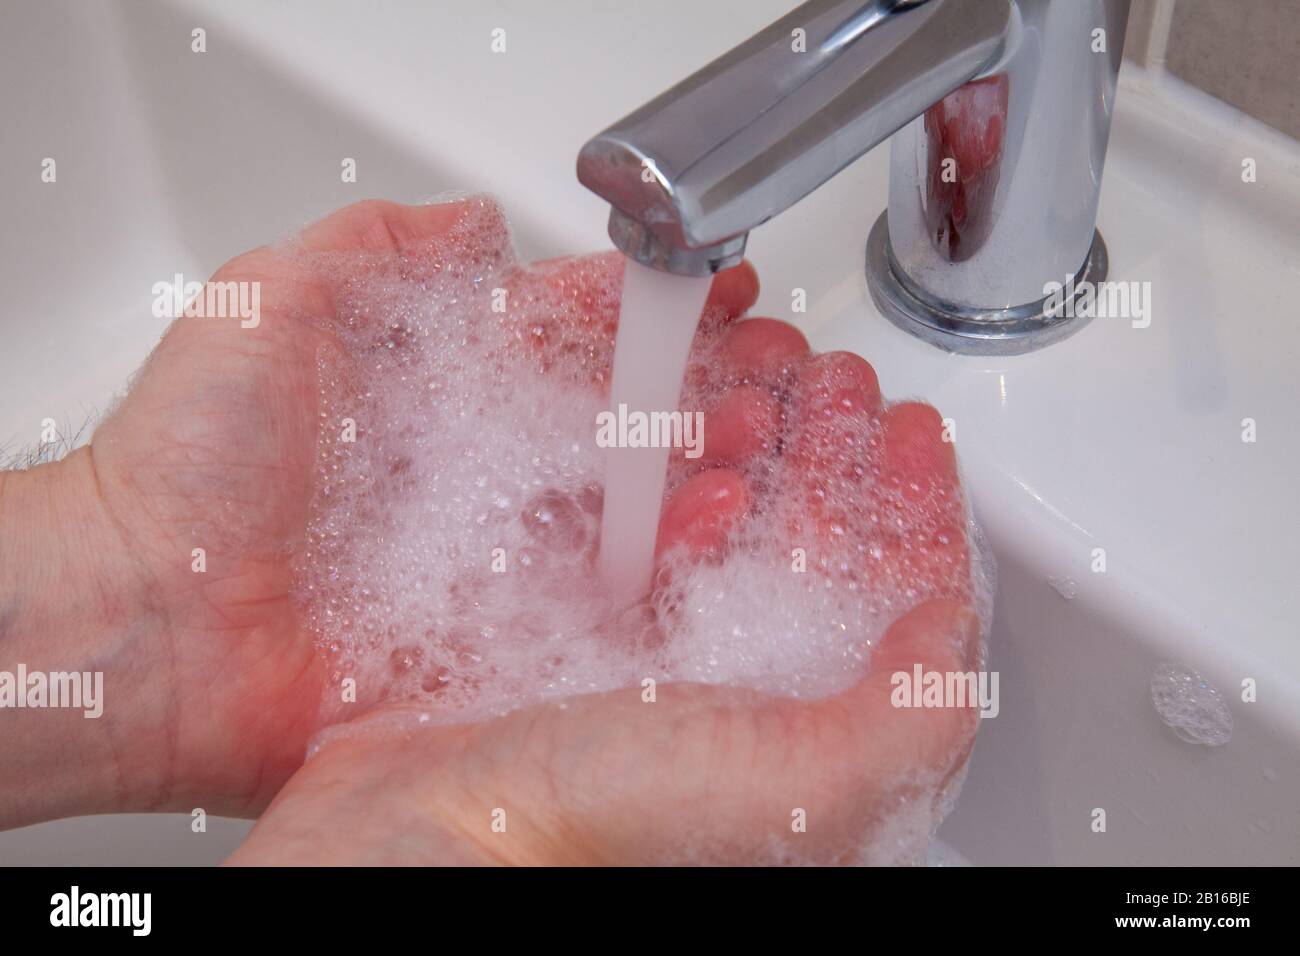 Hands being washed in soapy water in a sink under a tap of running water. Cleanliness, hygiene and safely removing dirt, viruses and bacteria. Stock Photo